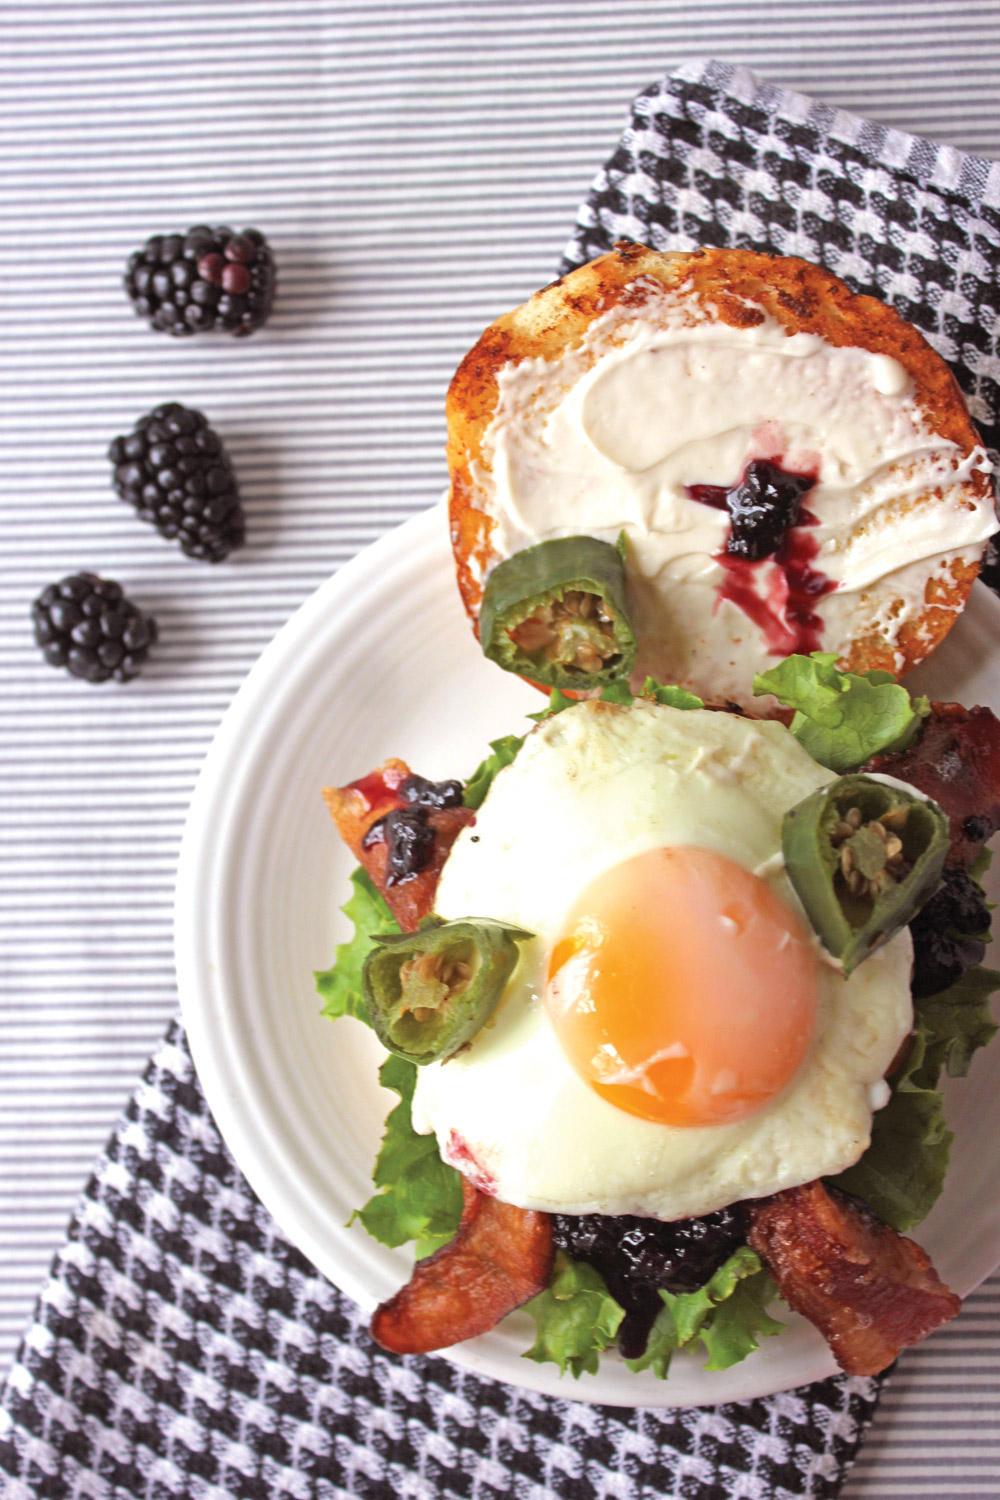 Overhead view of burger with sunny side up egg, ackberry jam, jalepenos, and lettuce with blackberries on side